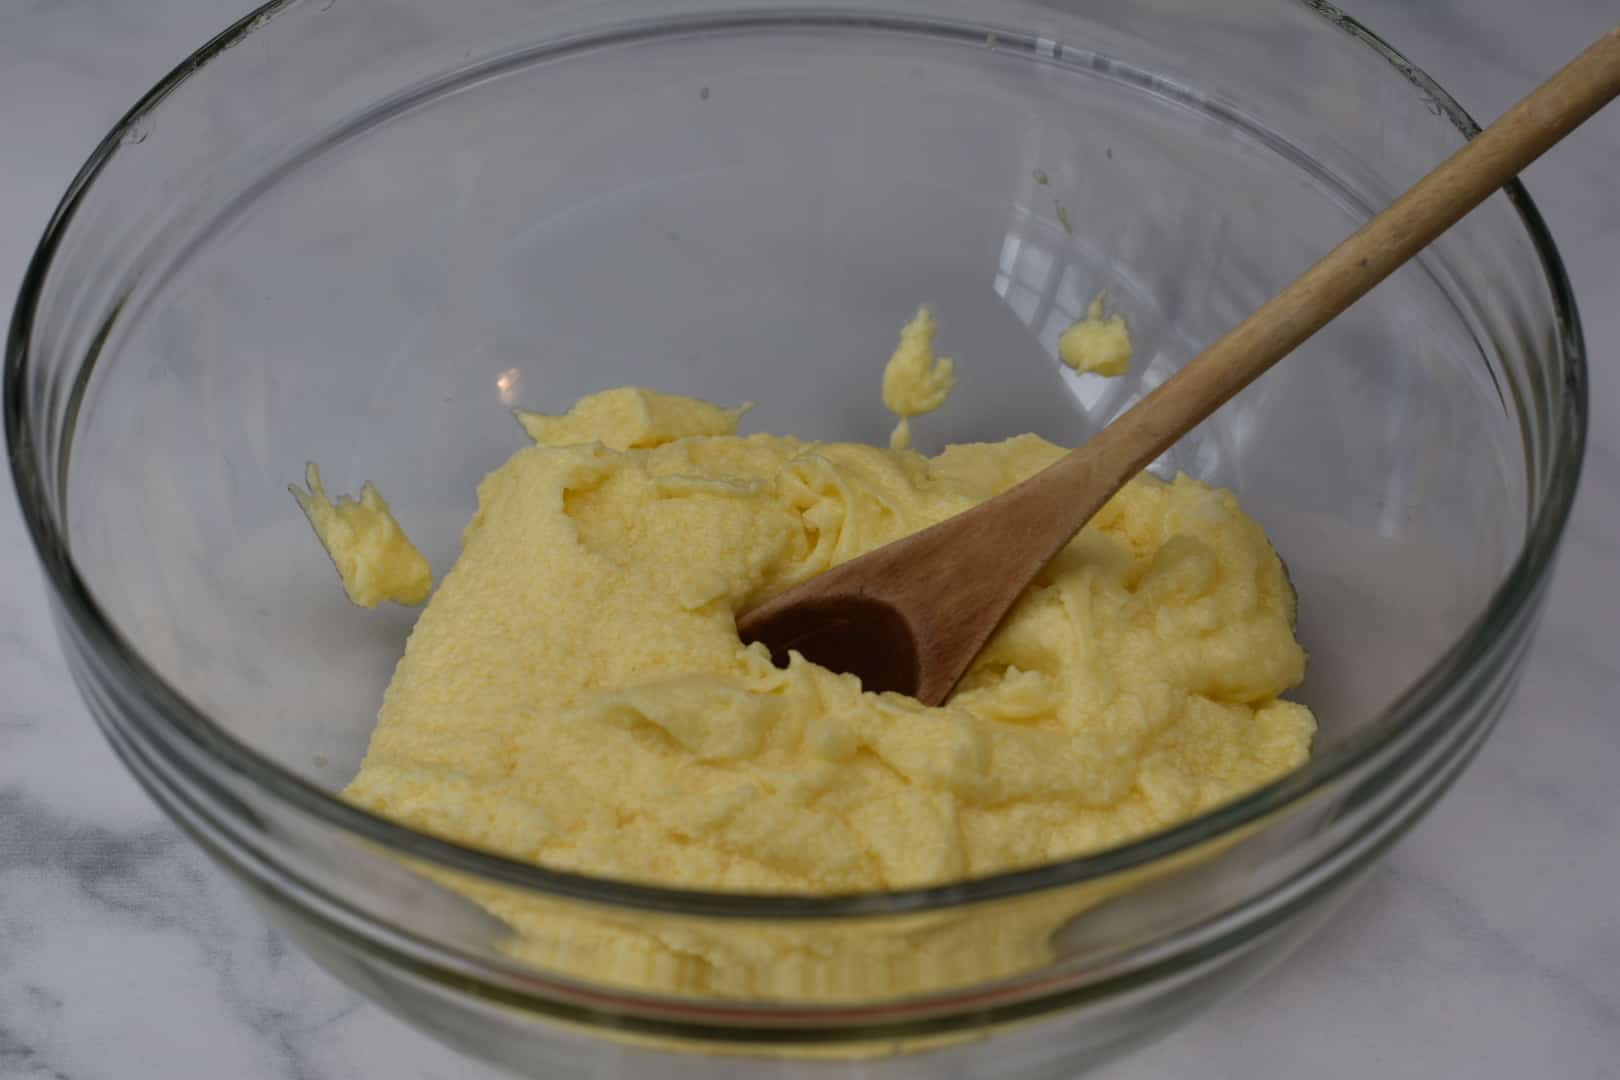 butter, sugar, and eggs in a glass bowl